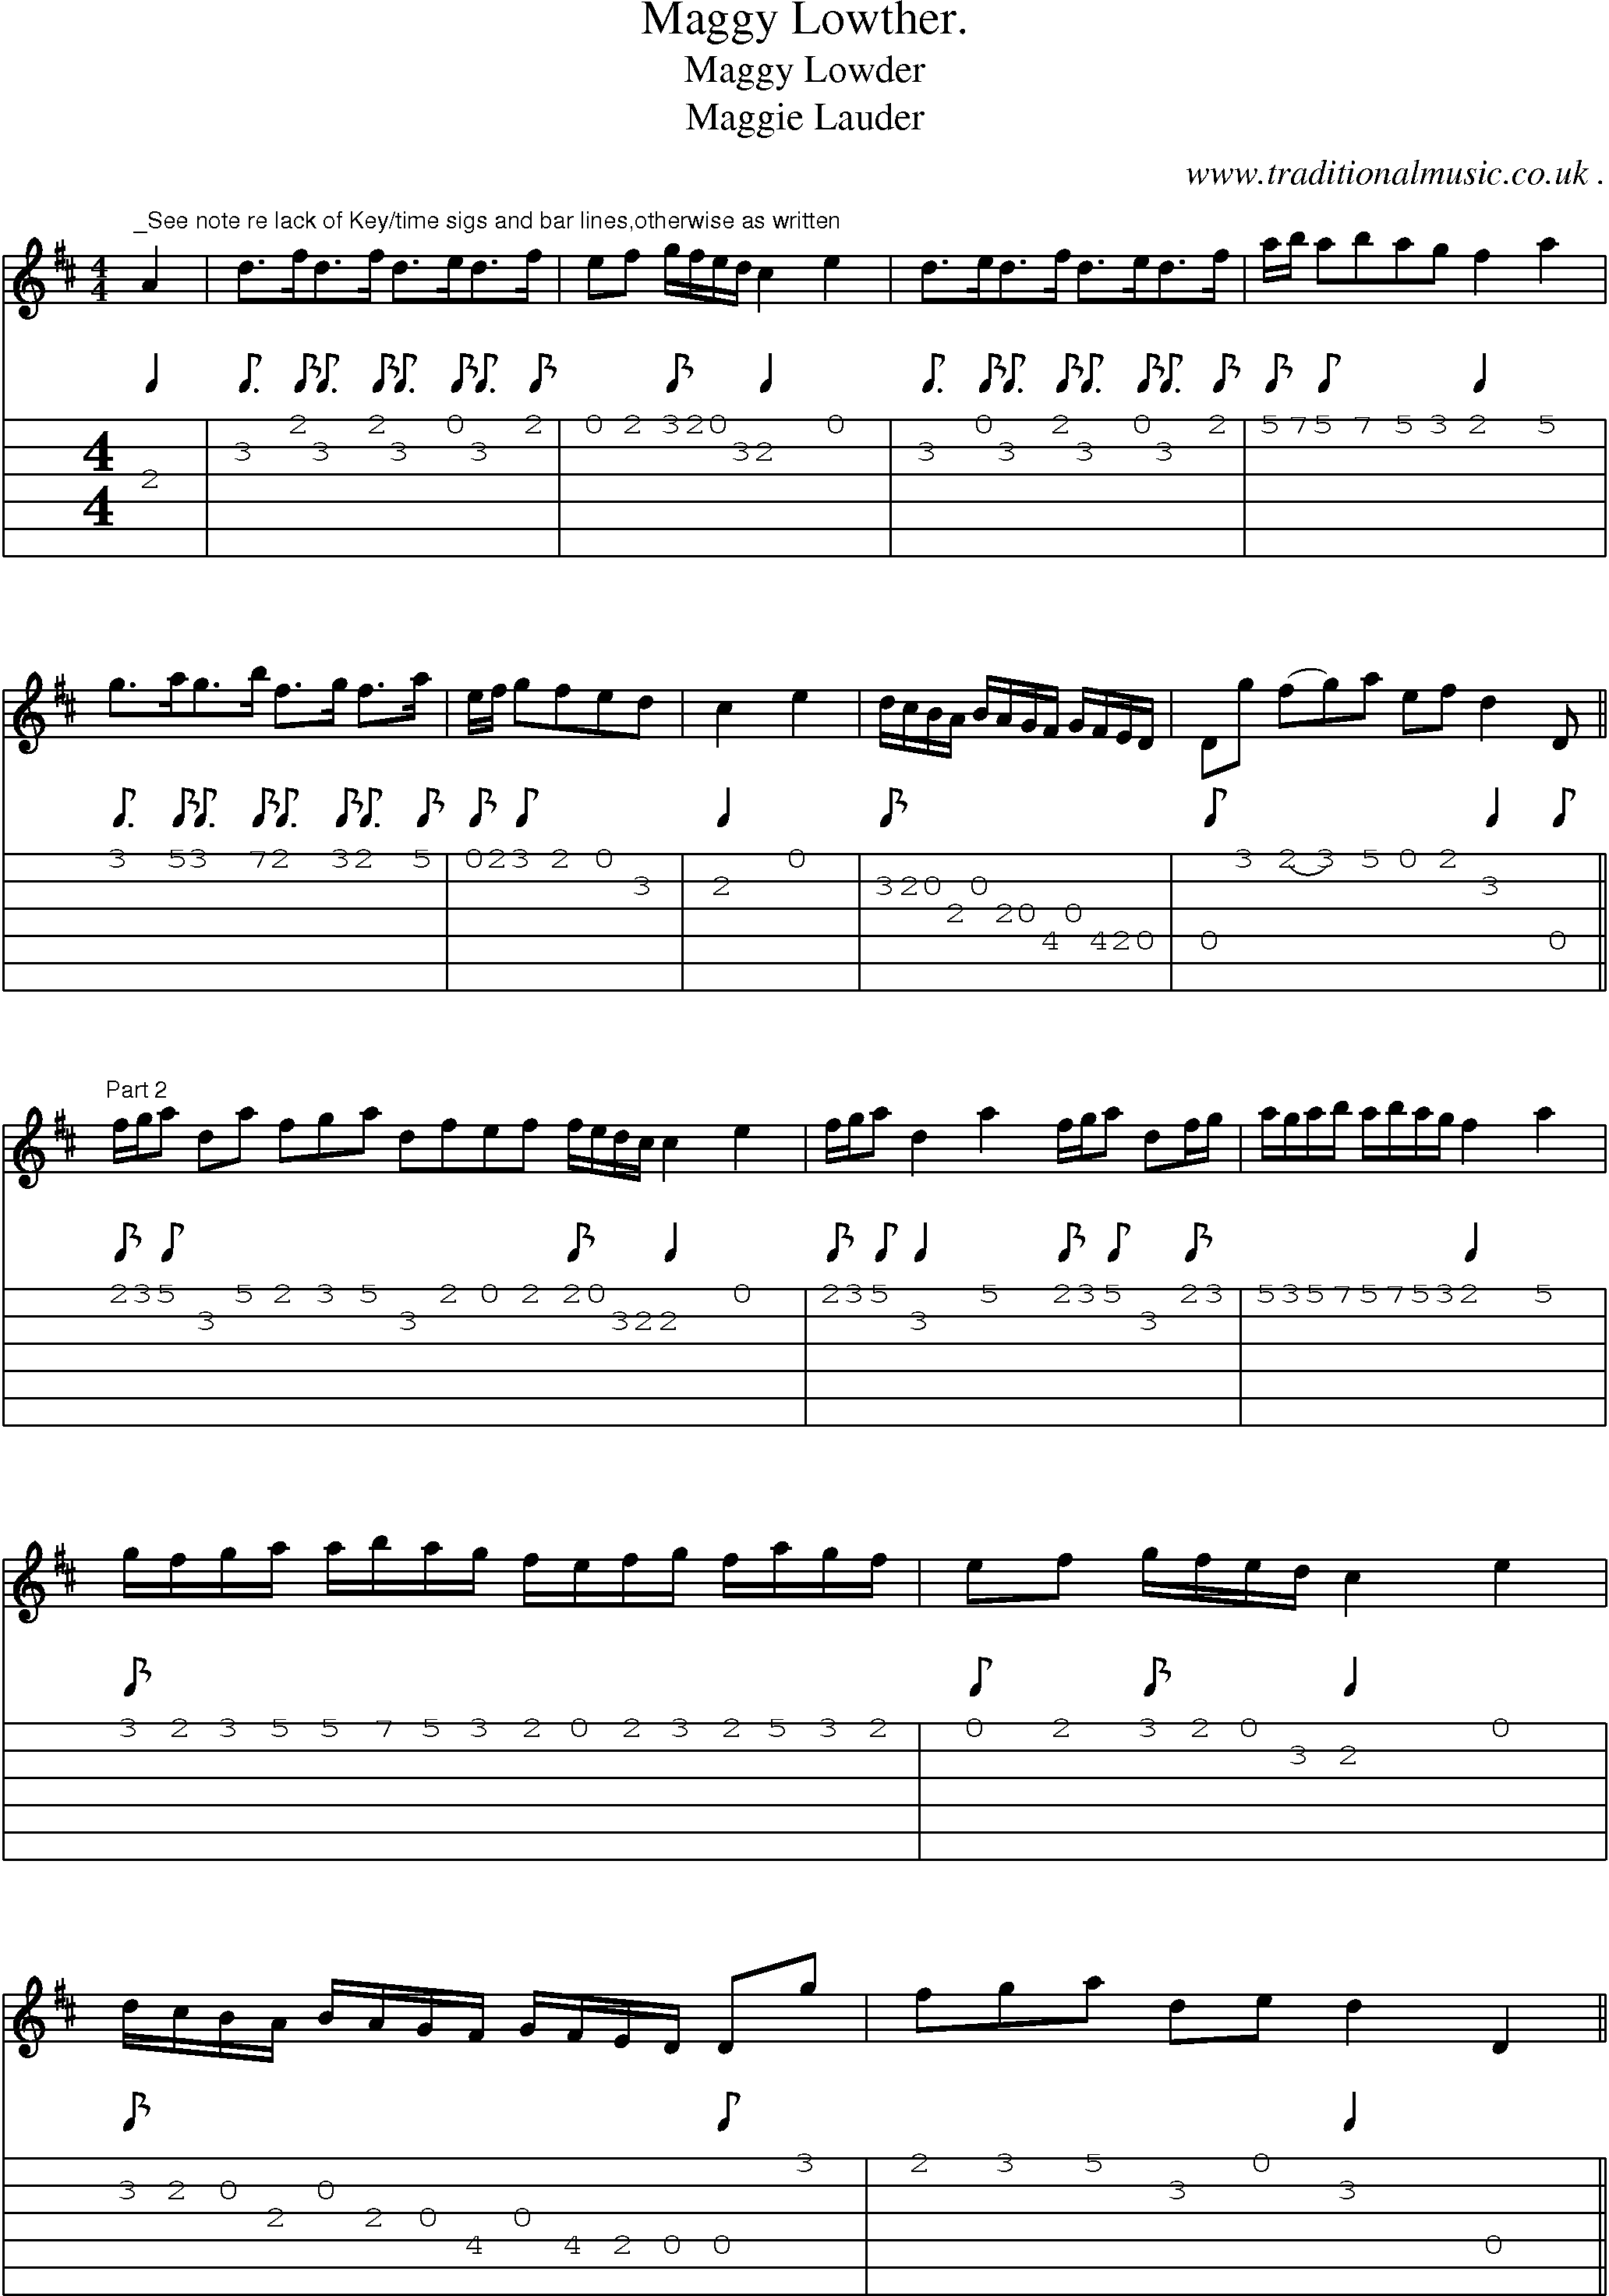 Sheet-Music and Guitar Tabs for Maggy Lowther